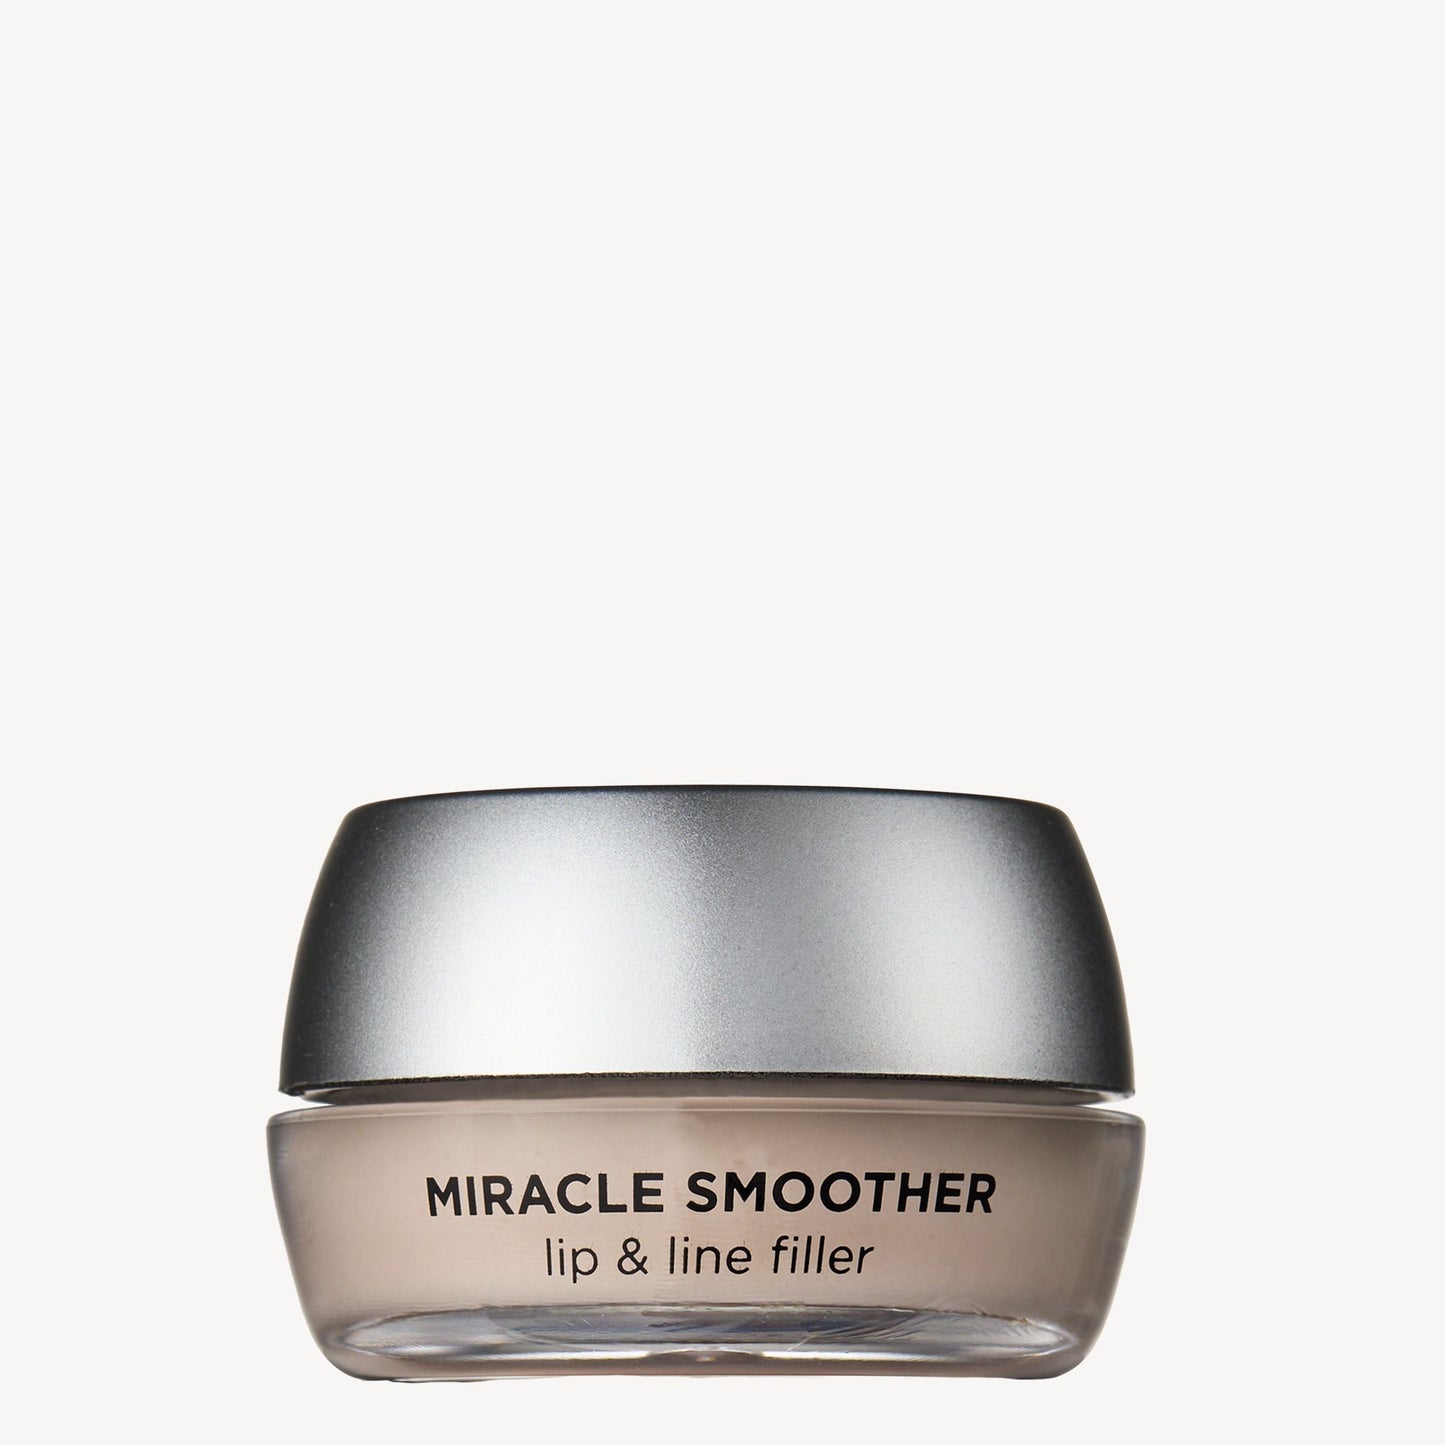 Miracle Smoother Lip & Line filler | DB Cosmetics